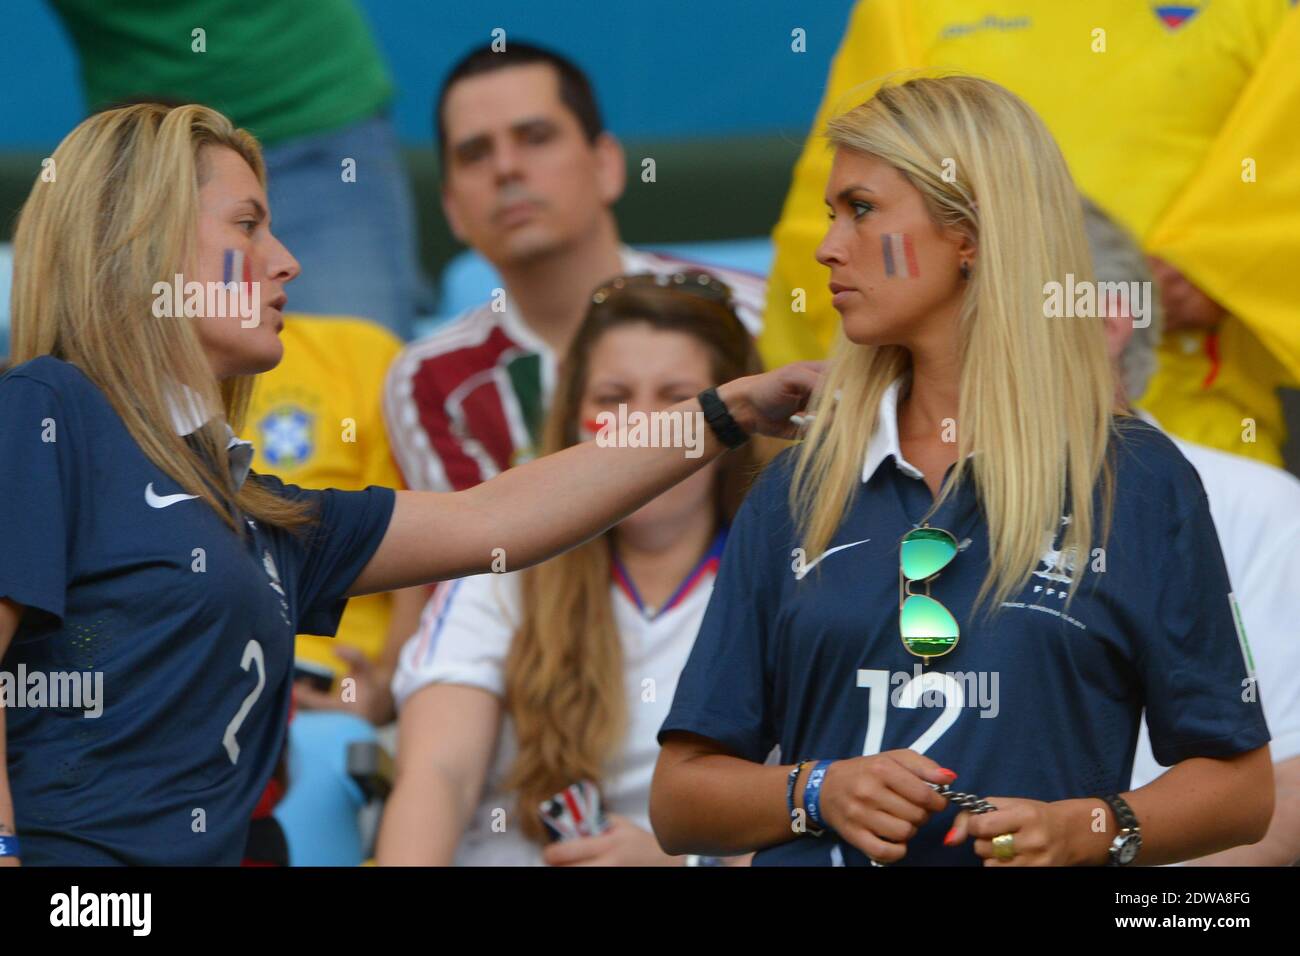 French players wives and girlfriends, Ludivine Debuchy and Rio Mavuba girlfriend Elodie, watch from the stands Soccer World Cup 2014 First round Group E match France vs Ecuador at the Maracana Stadium, Rio de Janeiro, Brazil on June 25th 2014. The game ended in a 0-0 draw. Photo by Henri Szwarc/ABACAPRESS.COM Stock Photo